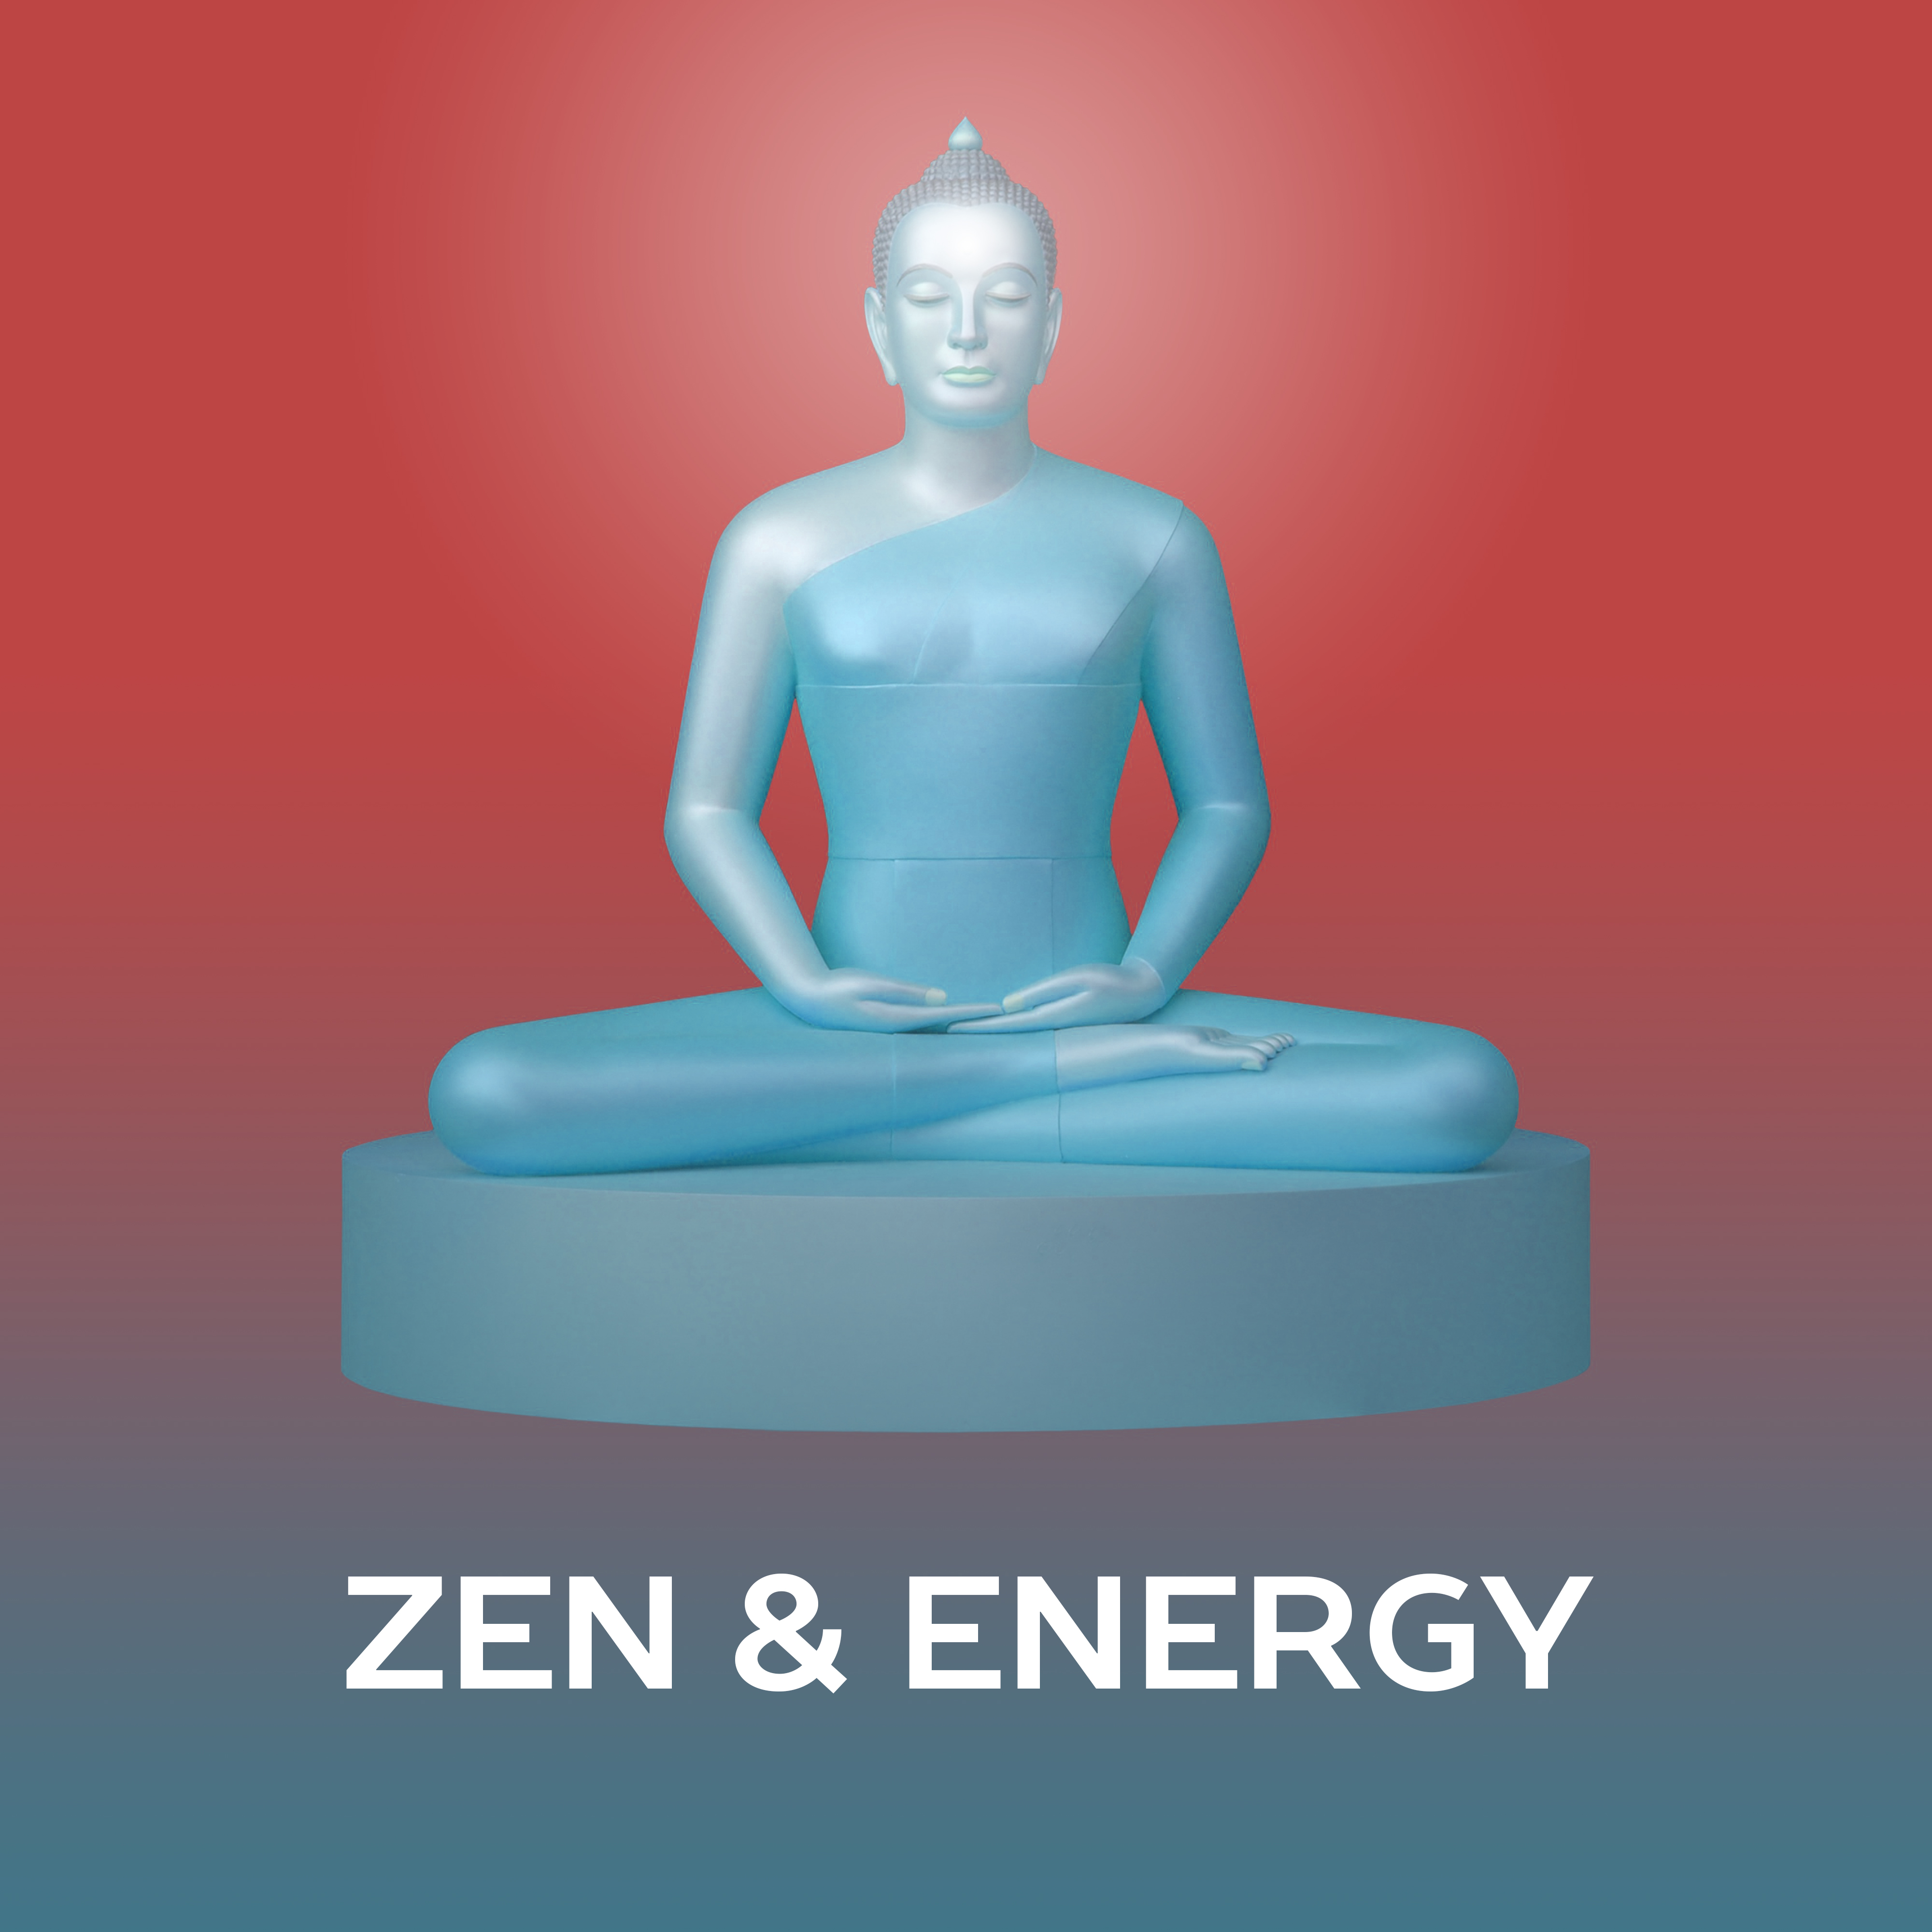 Zen  Energy  Music for Meditation, Training Yoga, Concentration, Harmony, Clear Mind, Nature Sounds for Relaxation